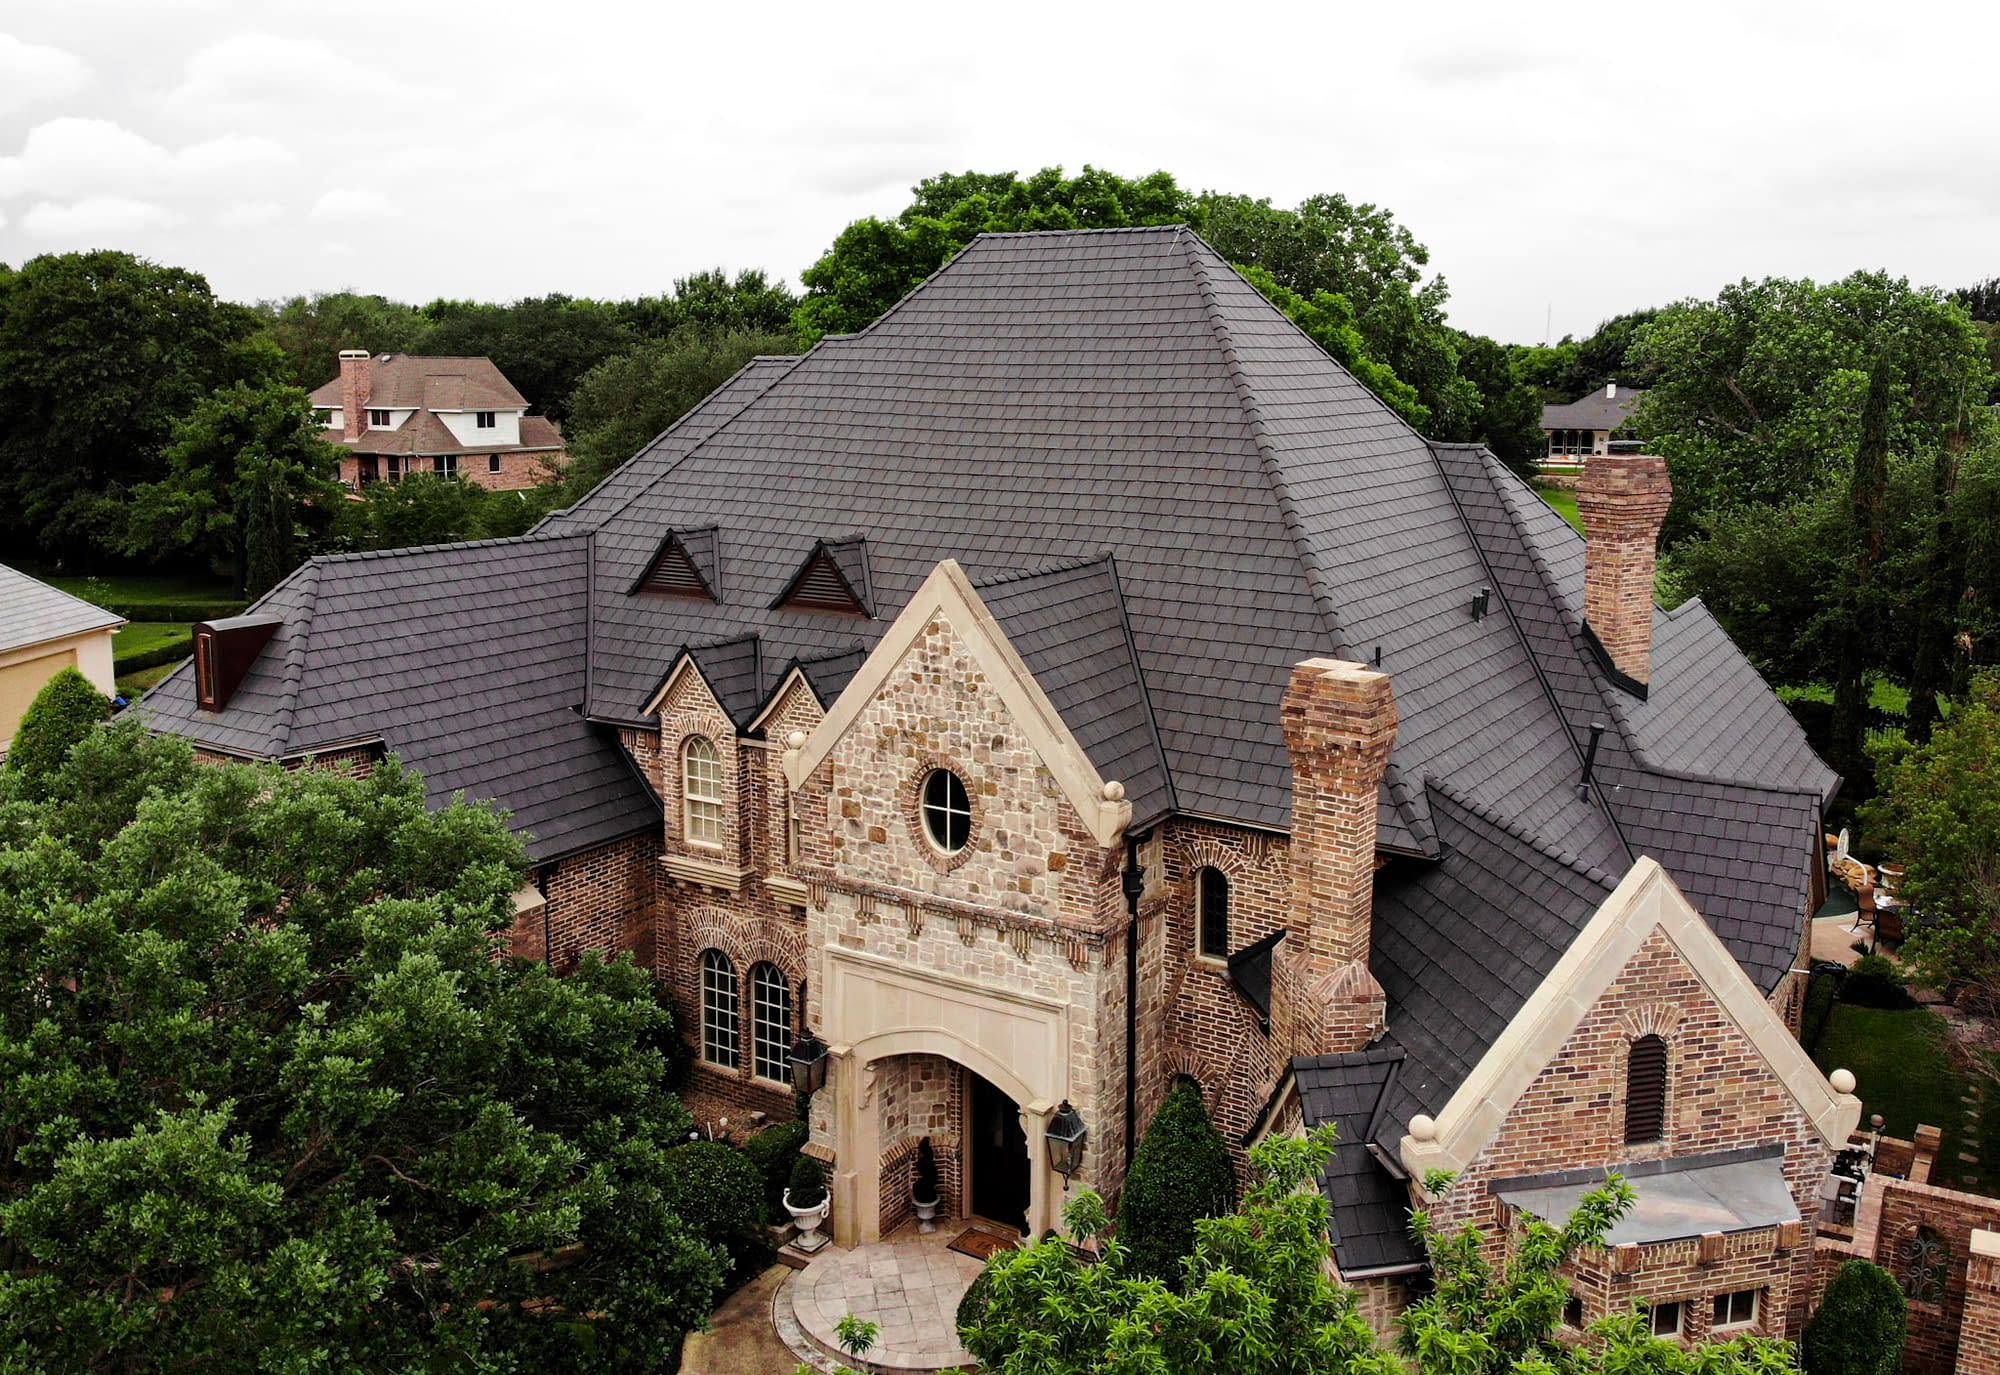 Tips for Choosing the Right Roofing Shingles for Your Climate